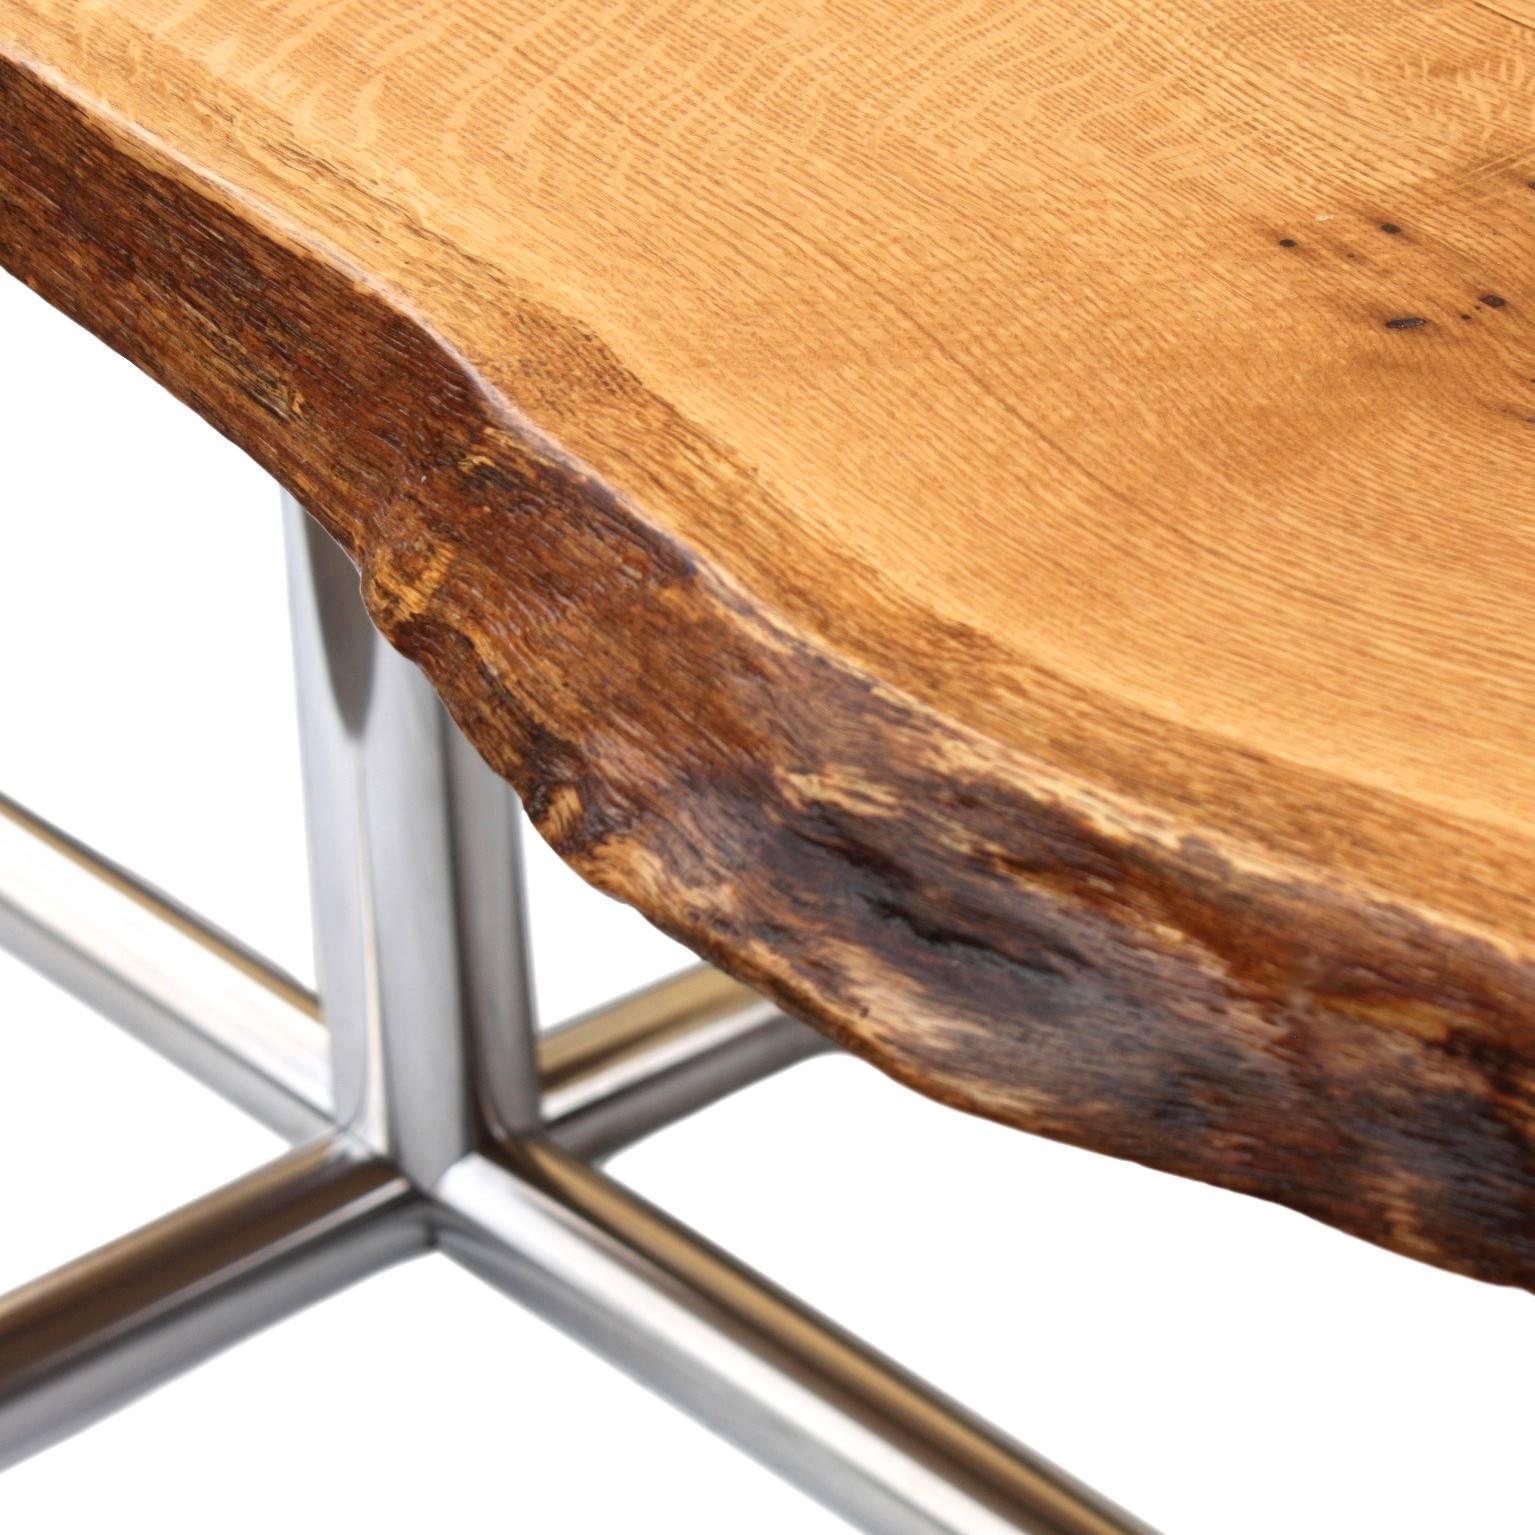 American Solid Live-Edge Oak Dining Table with Vintage Mid-Century Modern Chrome Legs